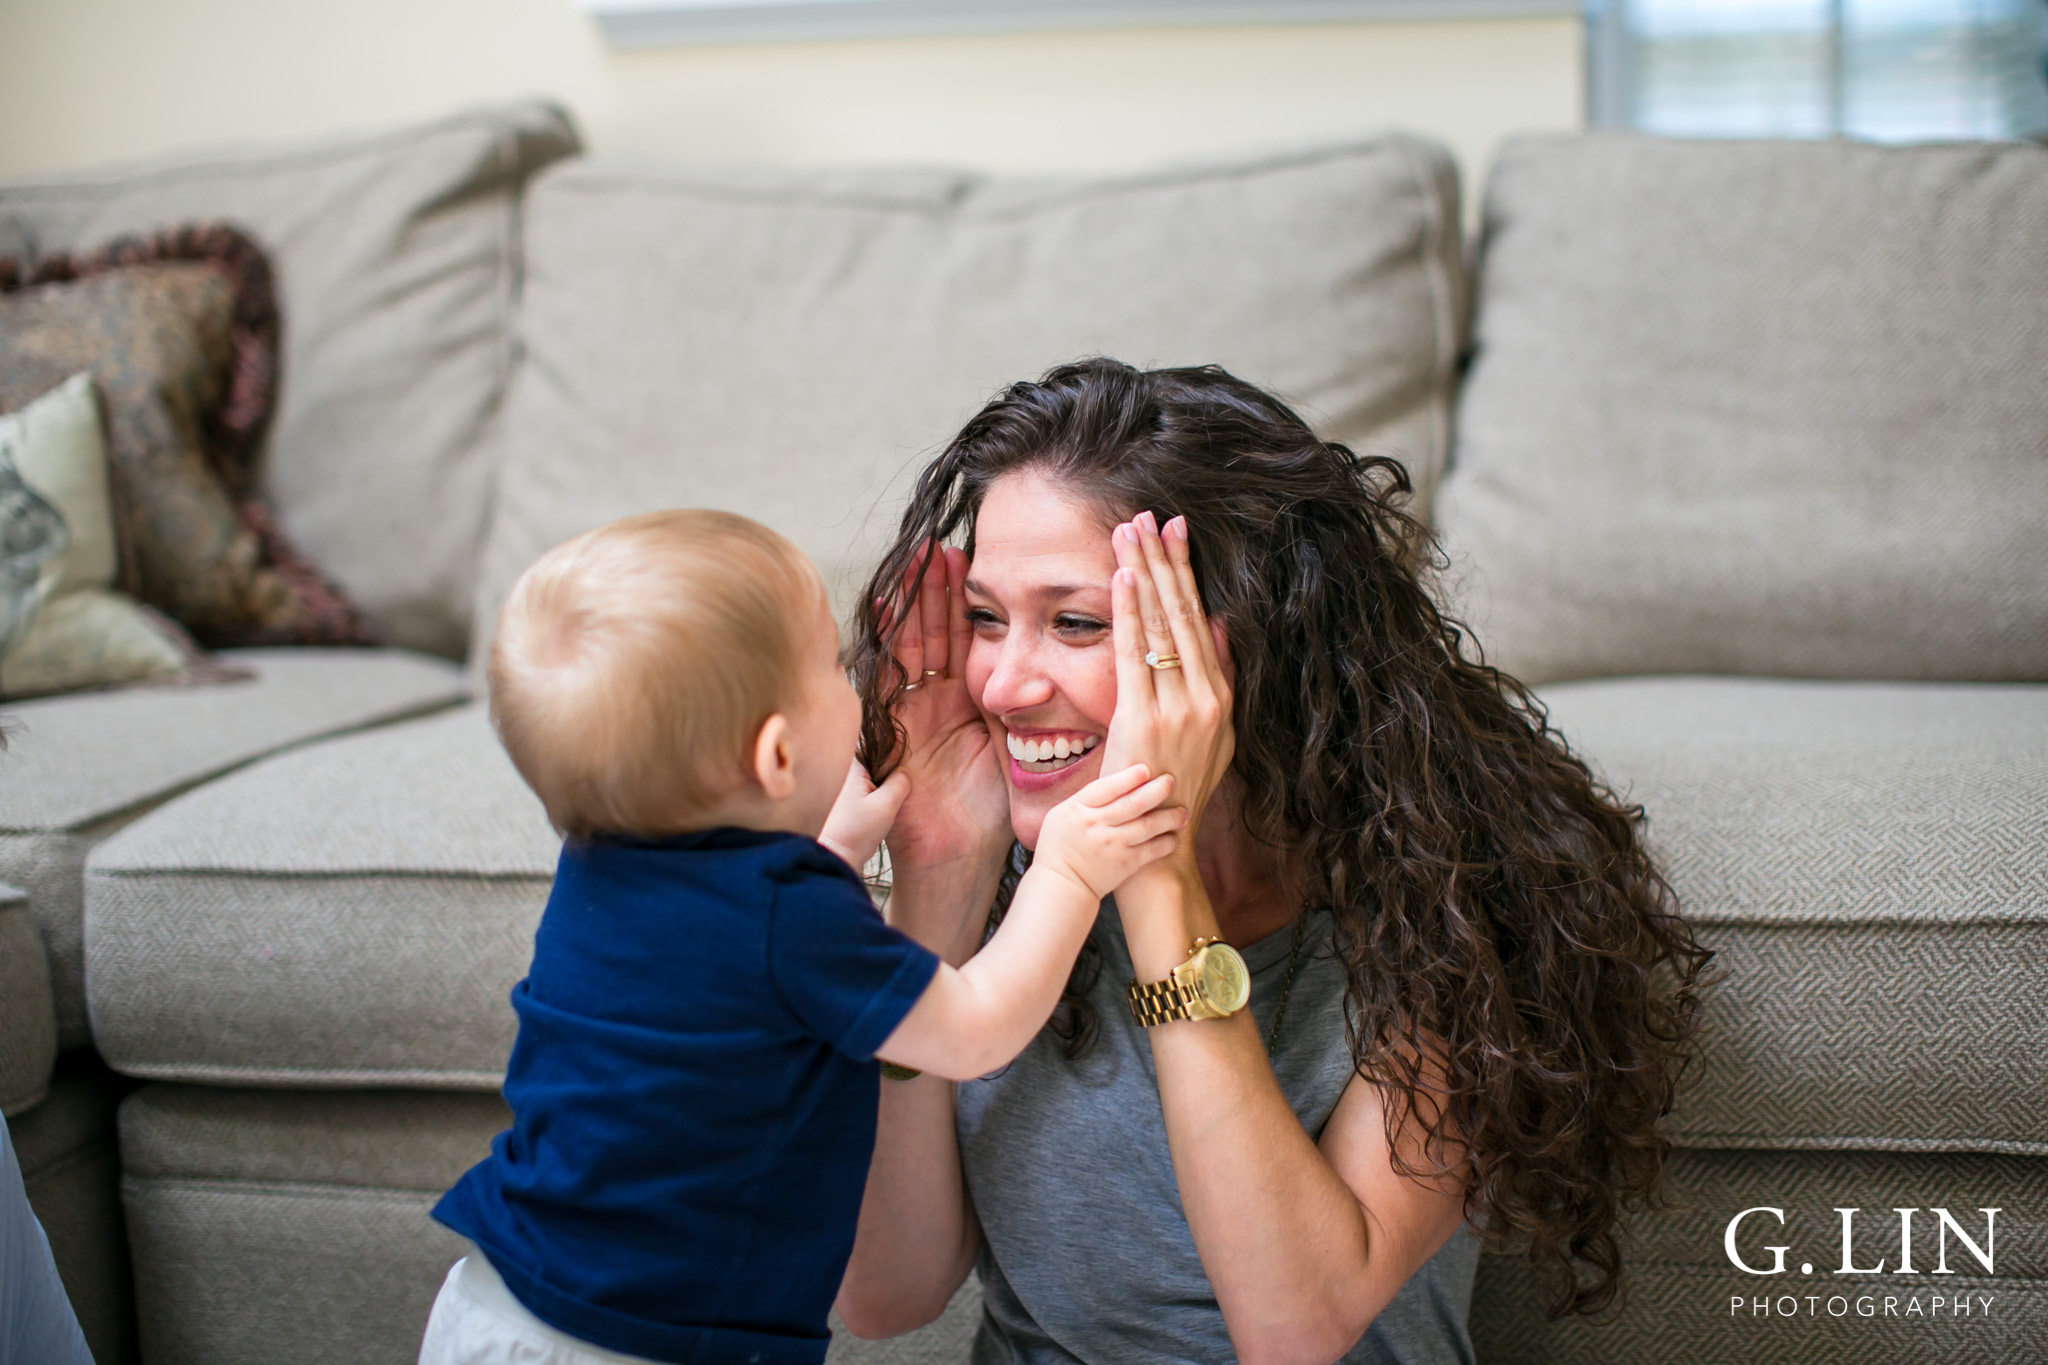 Raleigh Family Photographer | G. Lin Photography | Mommy and baby smiling at each other 